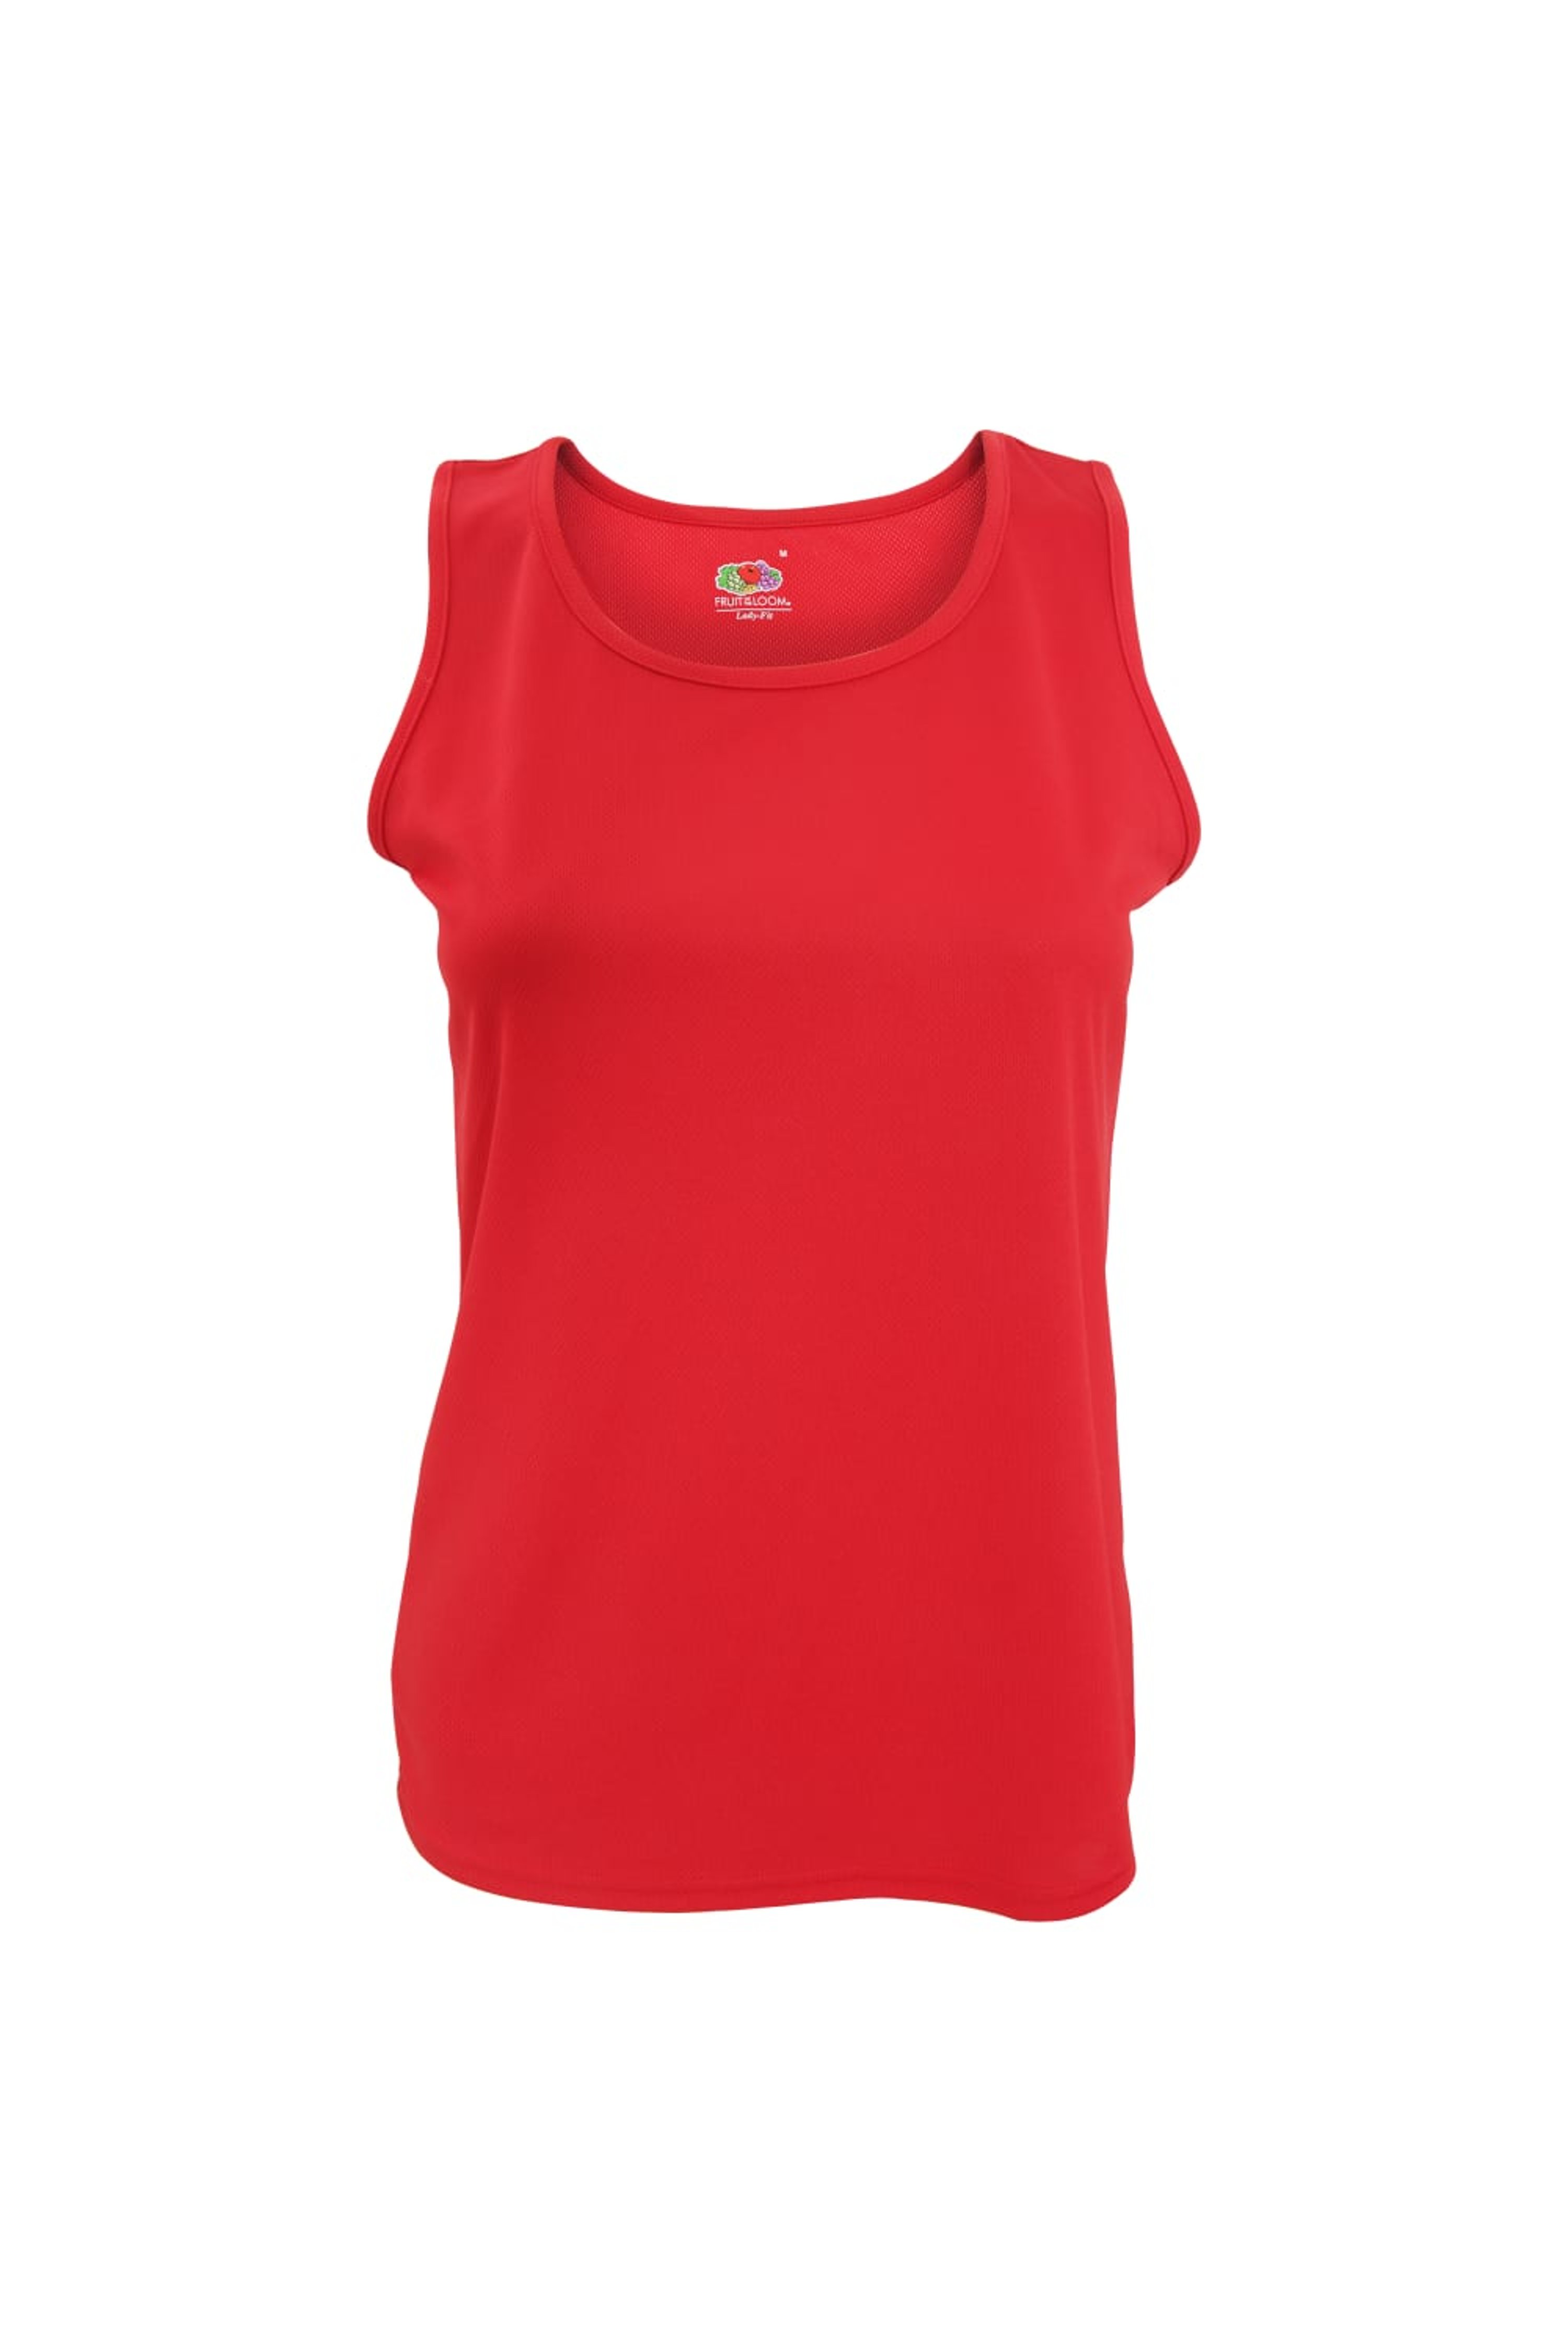 FRUIT OF THE LOOM FRUIT OF THE LOOM FRUIT OF THE LOOM WOMENS/LADIES SLEEVELESS LADY-FIT PERFORMANCE VEST TOP (RED)